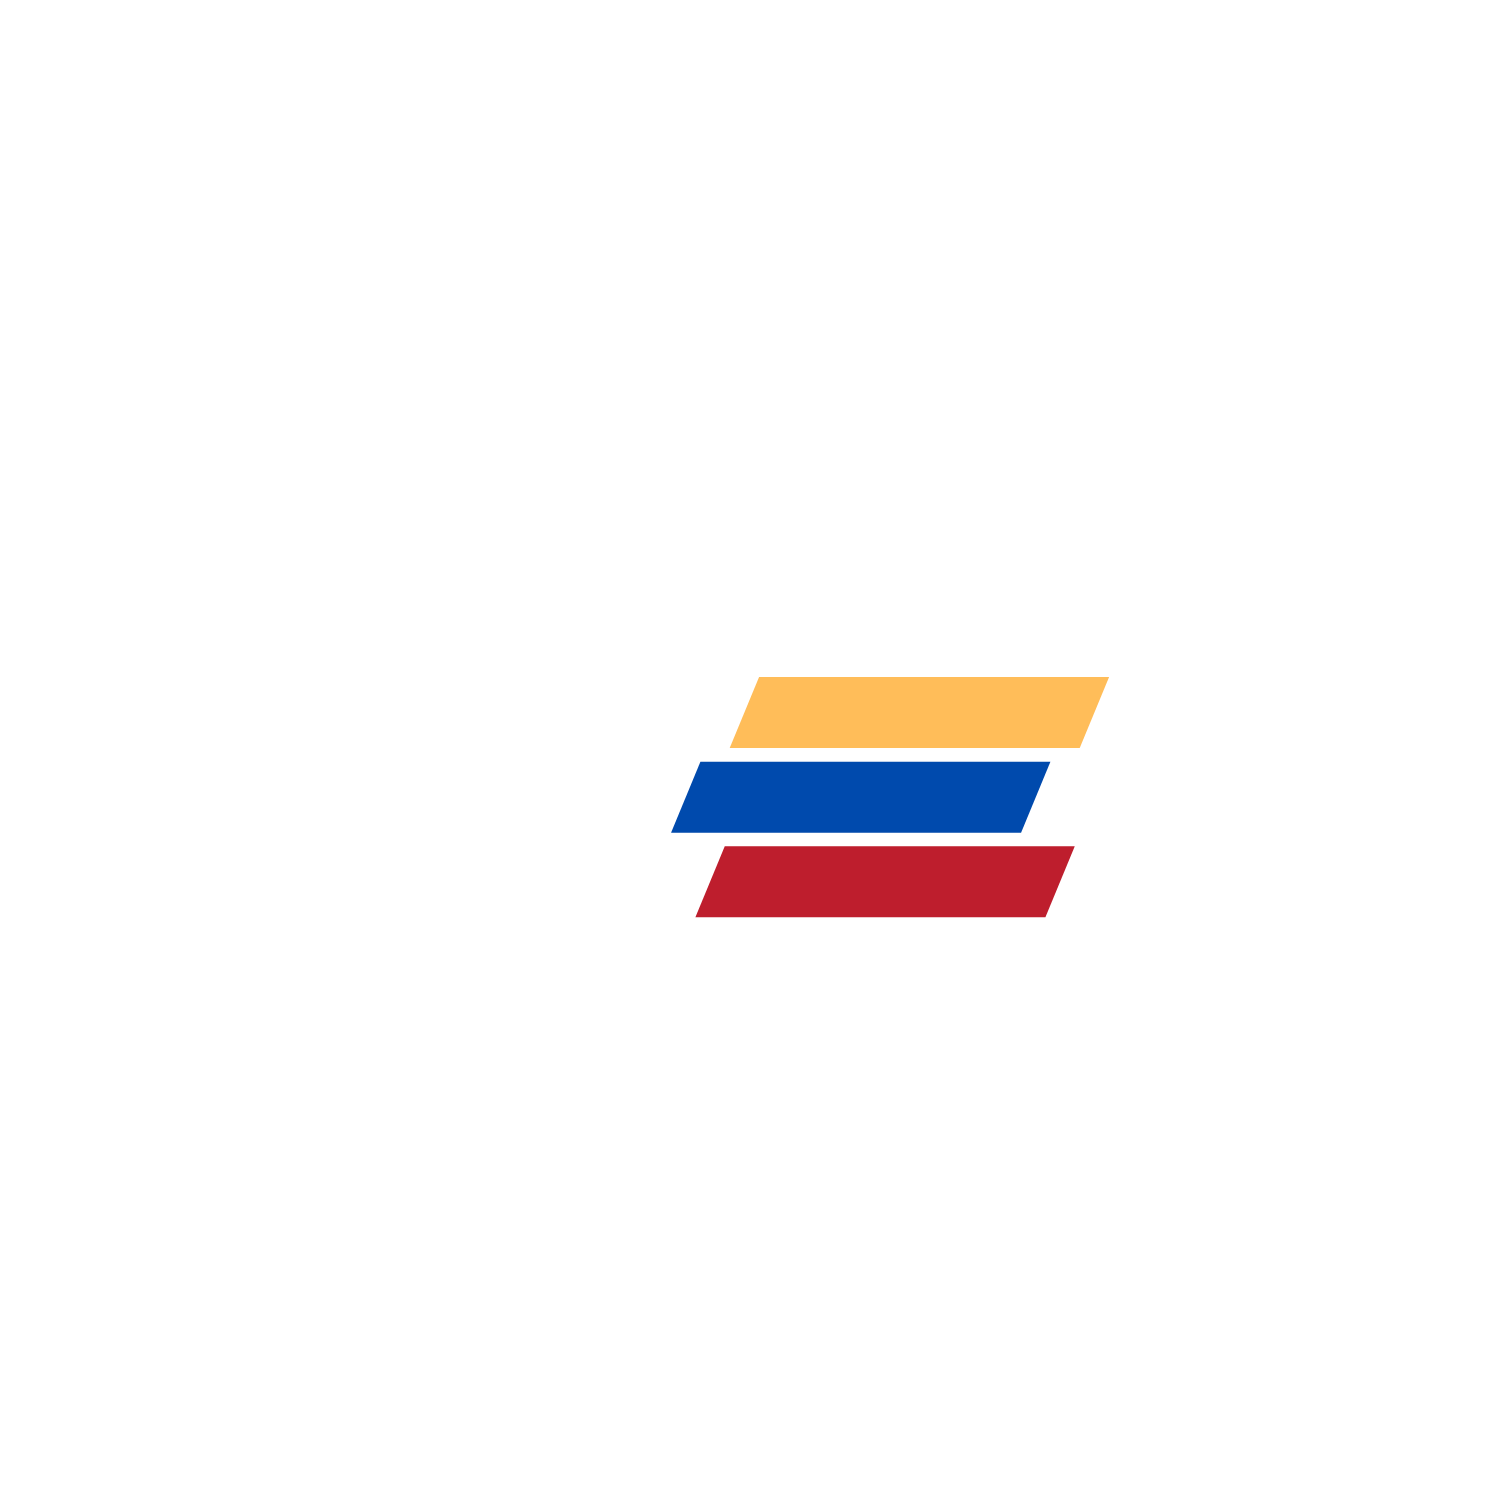 Profesional solution for your home